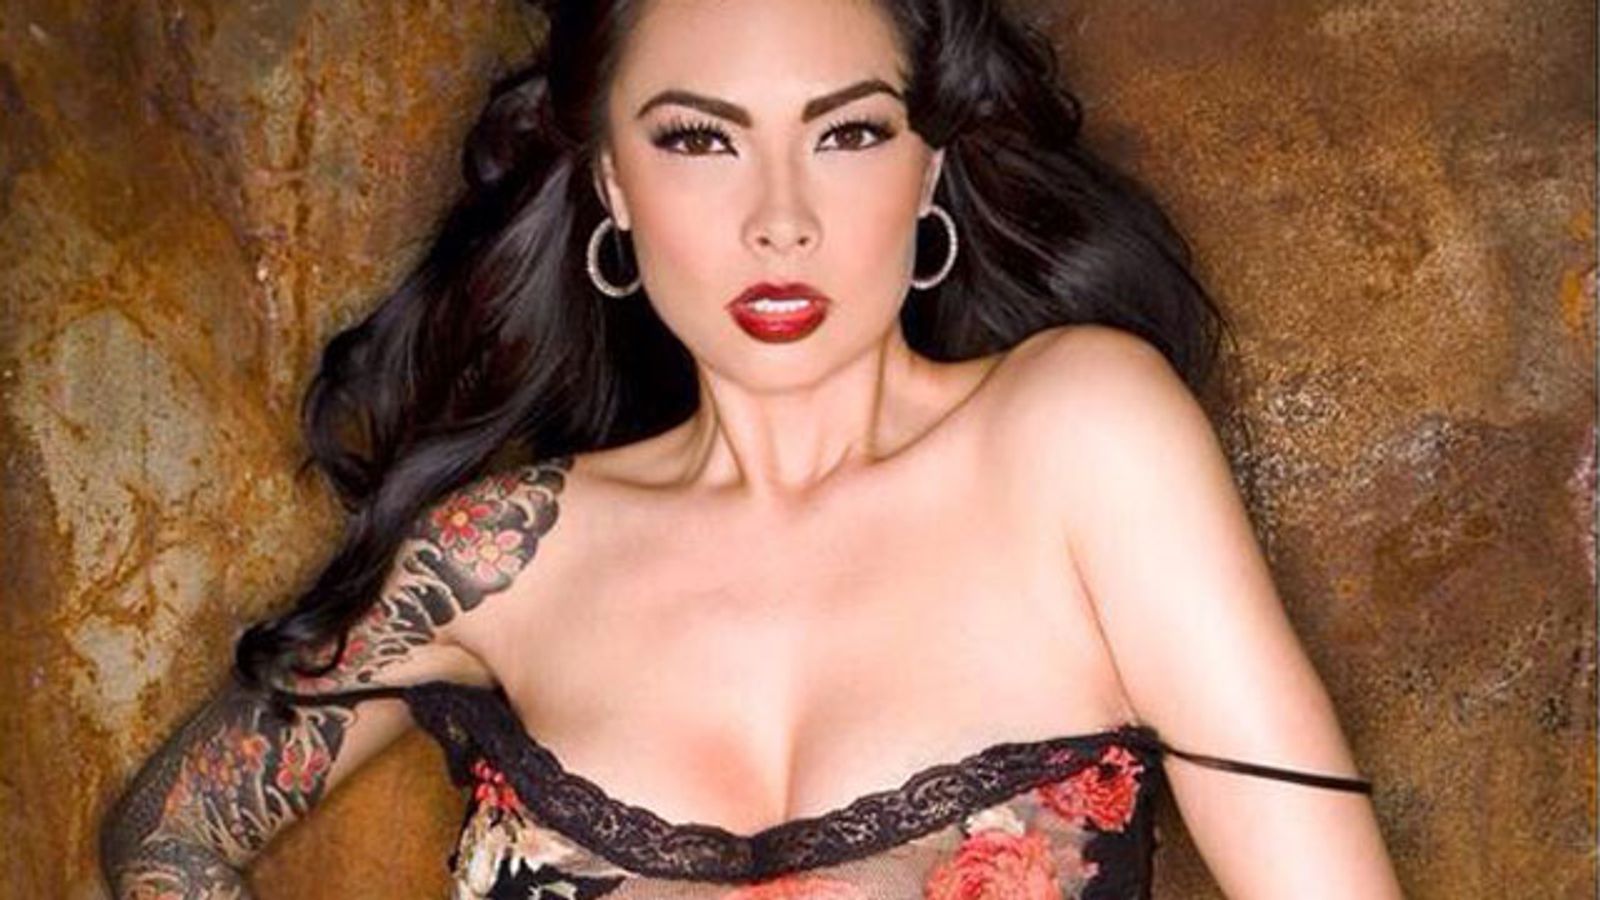 Interview: Tera Patrick Goes On the Air with Vivid Radio